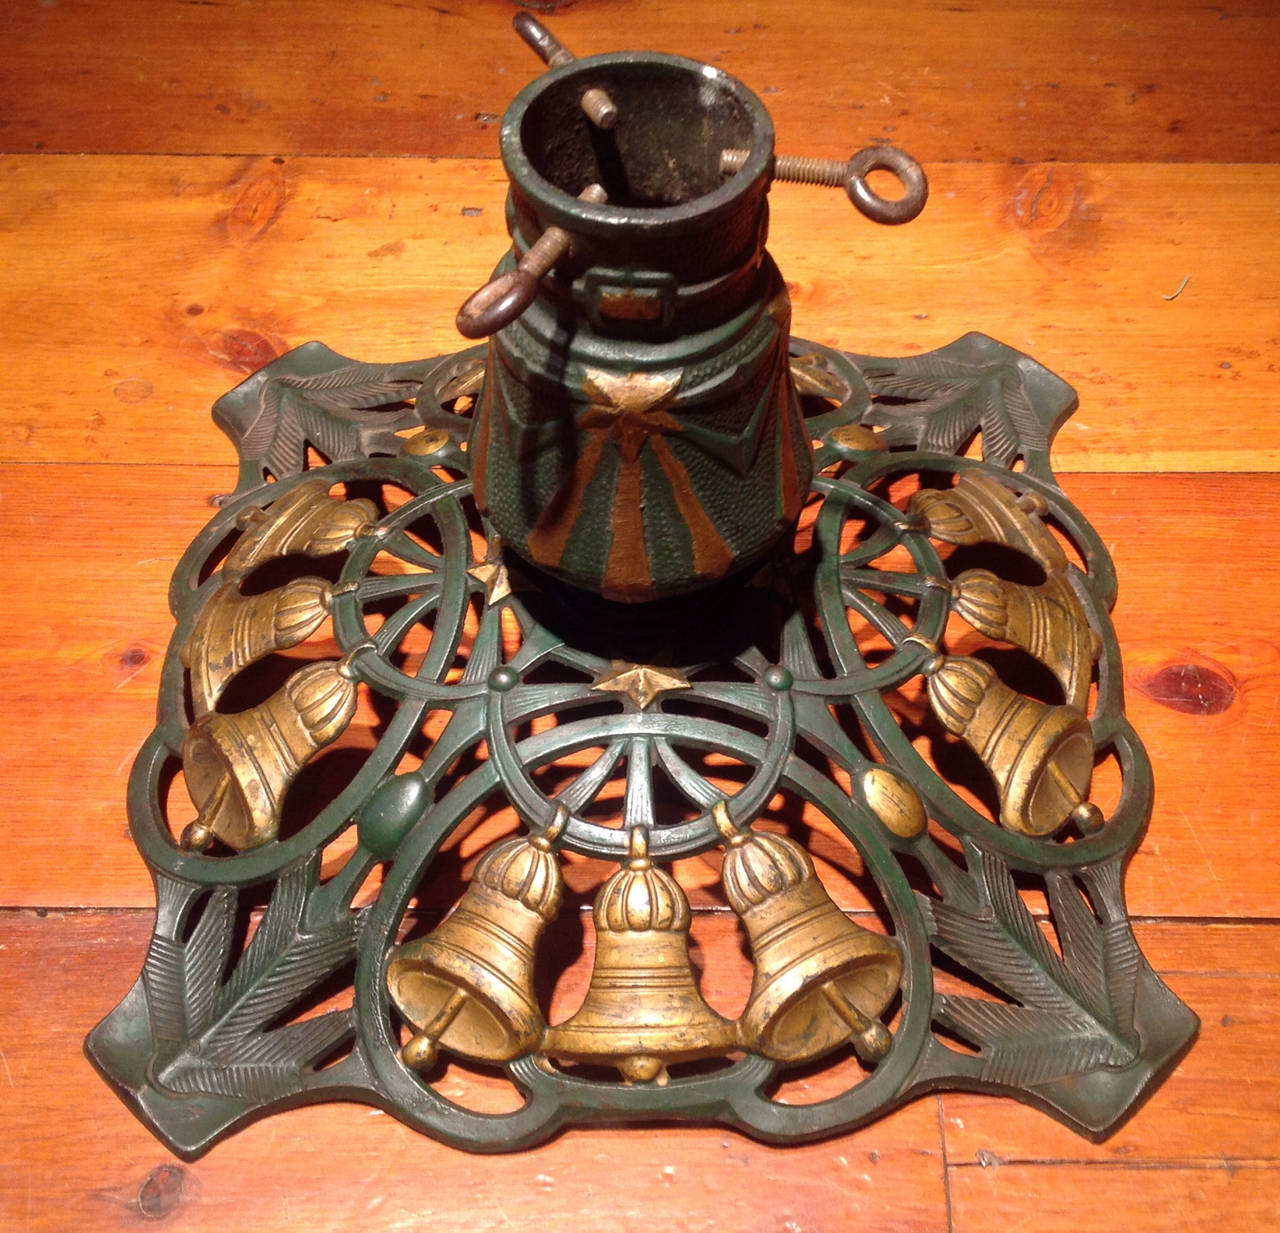 Very Fine Antique Cast Iron Christmas Tree Stand with a pieced base composed of four cartouches-each withthree golden bells bodered by a splayed foot decorated with pine boughs.  This piece retains the original green and gold washes and is large